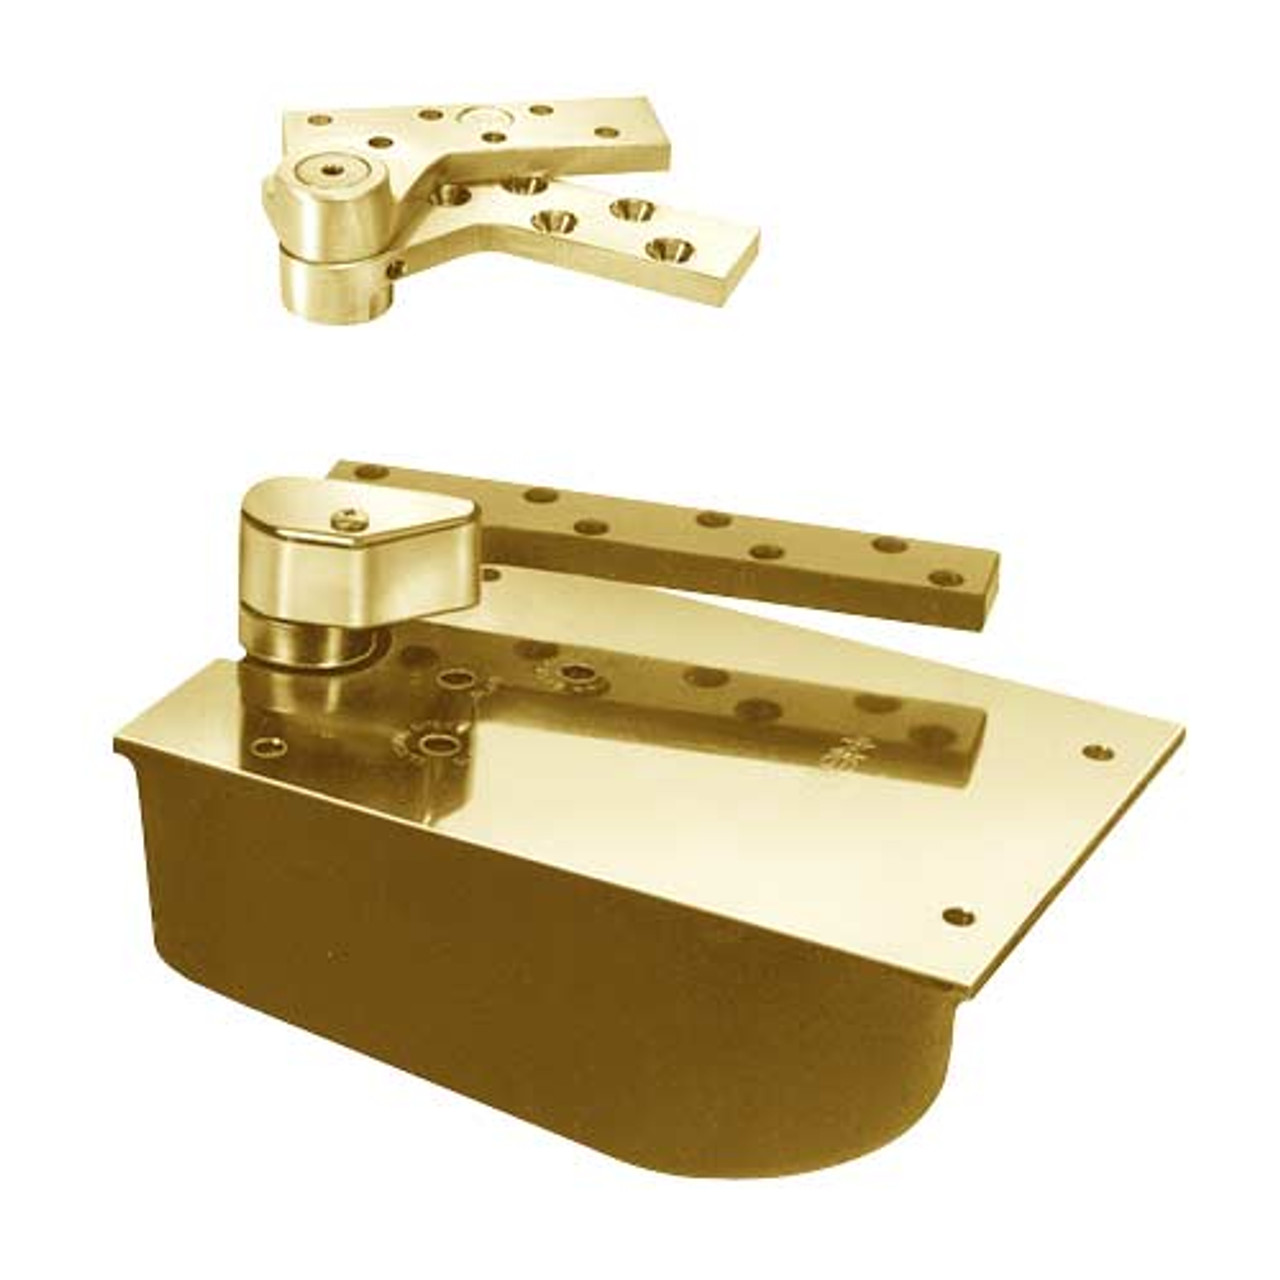 L27-95S-LH-605 Rixson 27 Series Extra Heavy Duty Lead Lined Offset Floor Closer in Bright Brass Finish